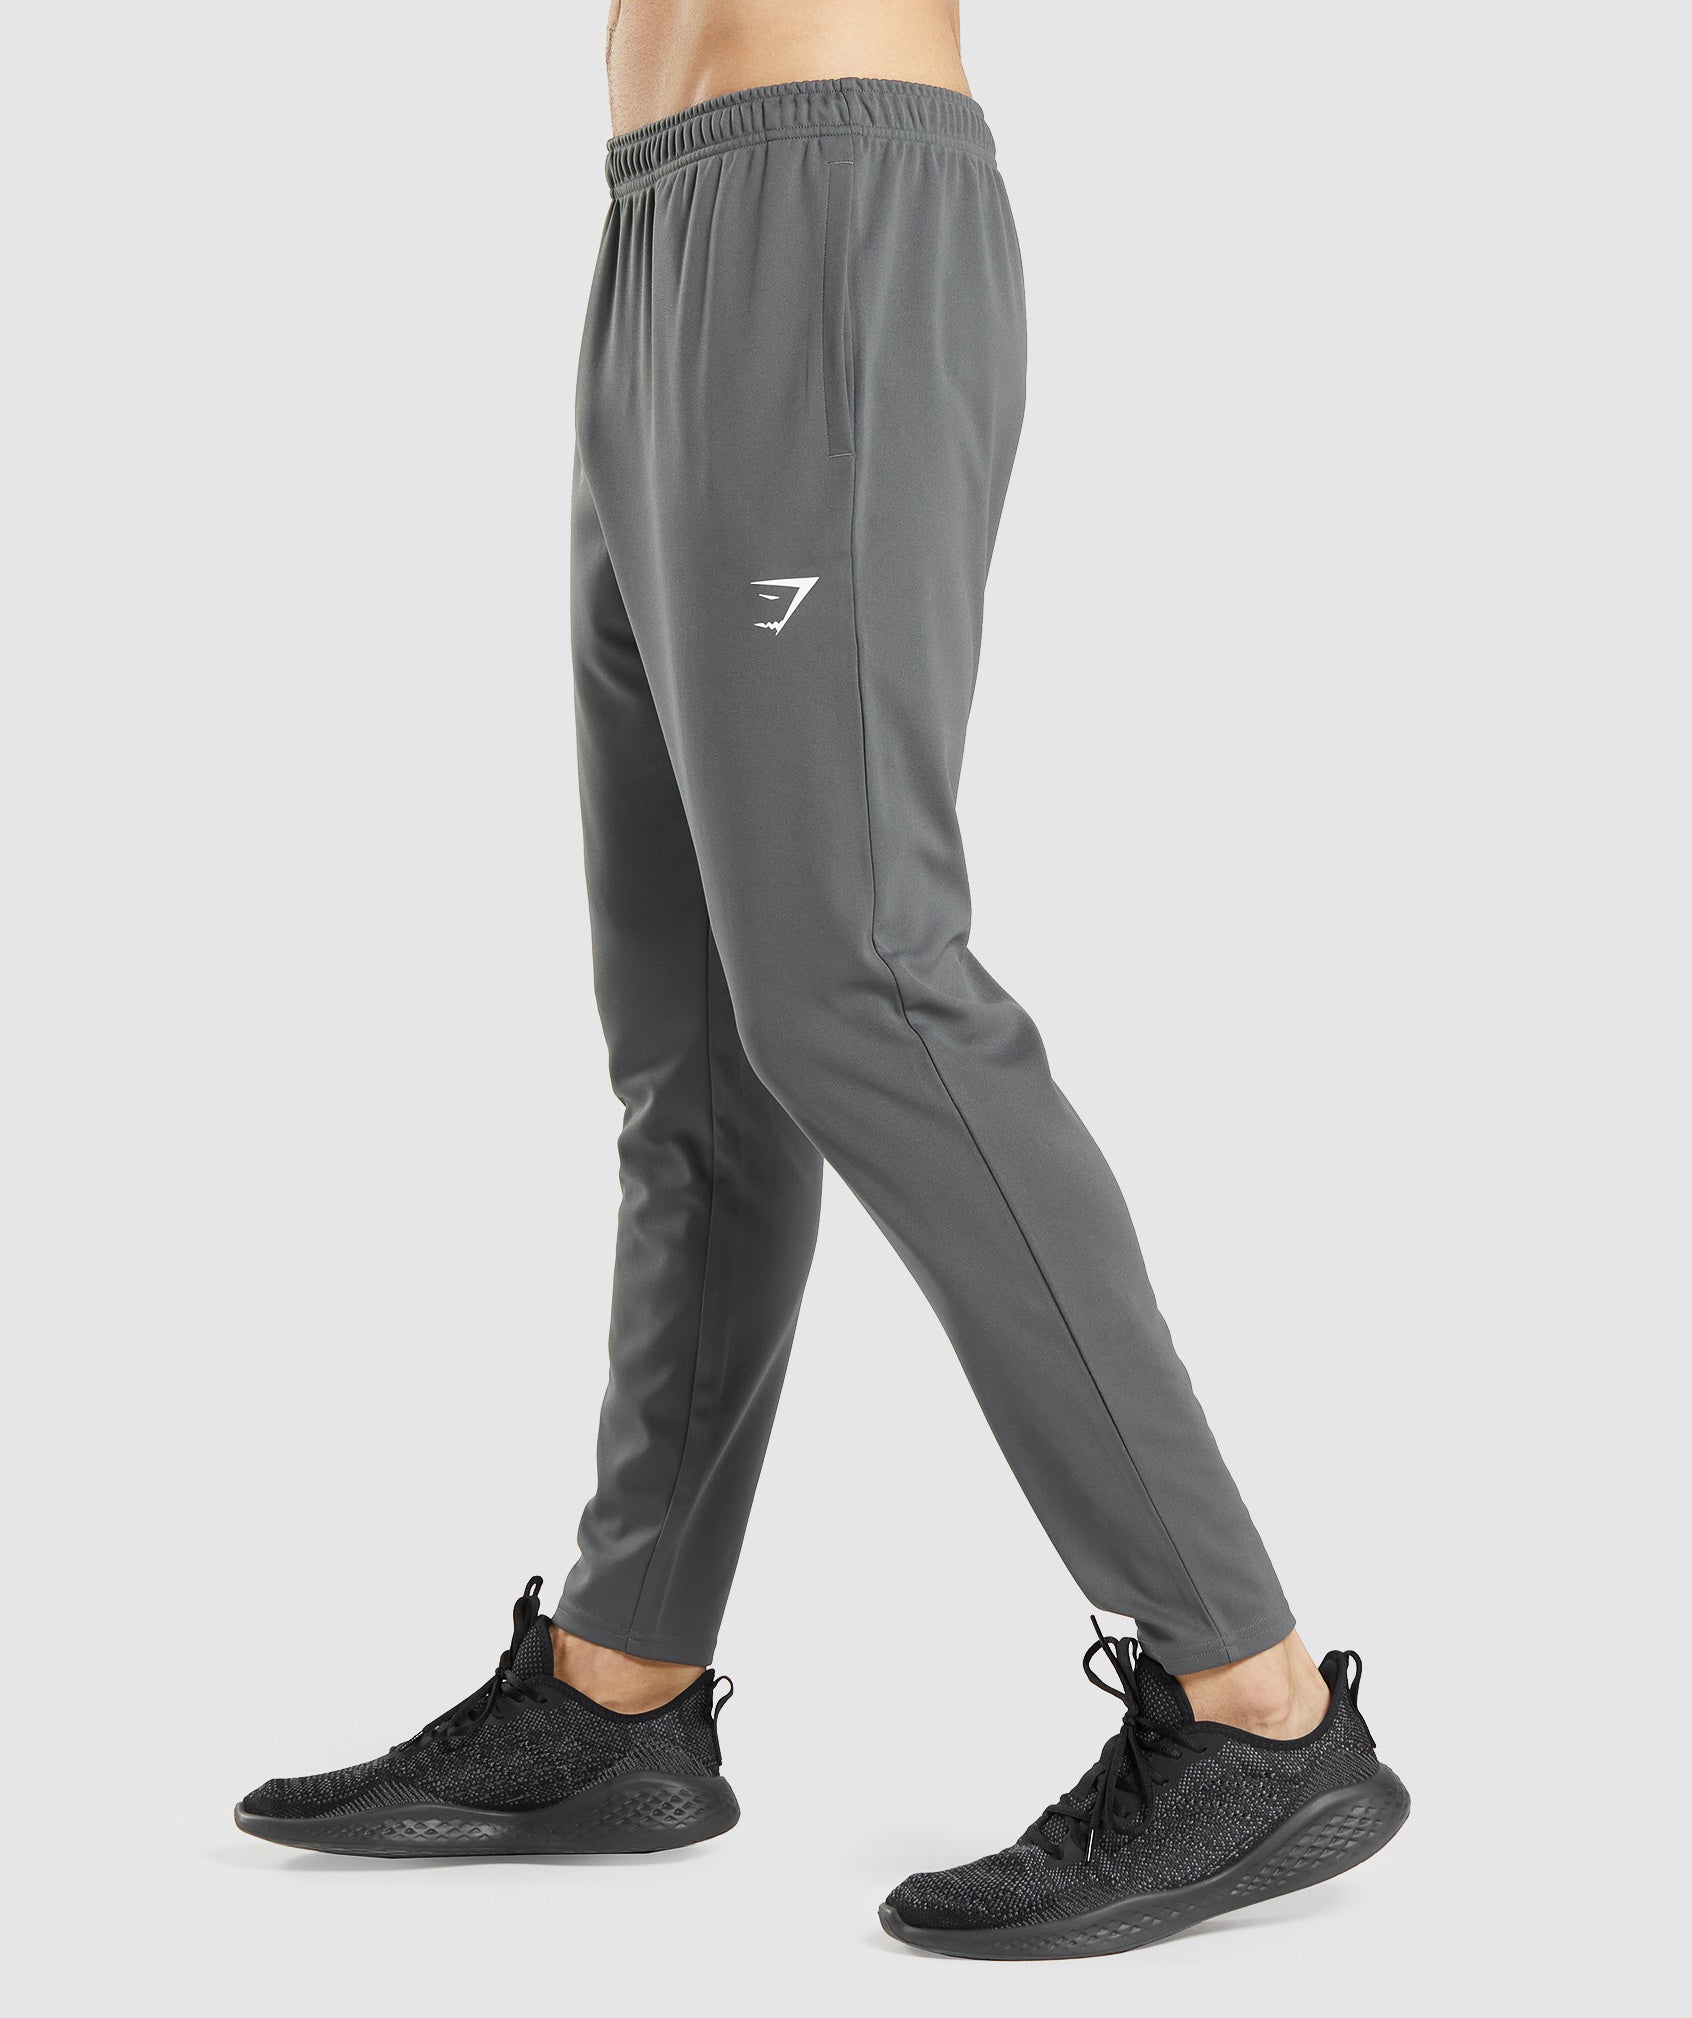 Arrival Knit Joggers in Charcoal Grey - view 3